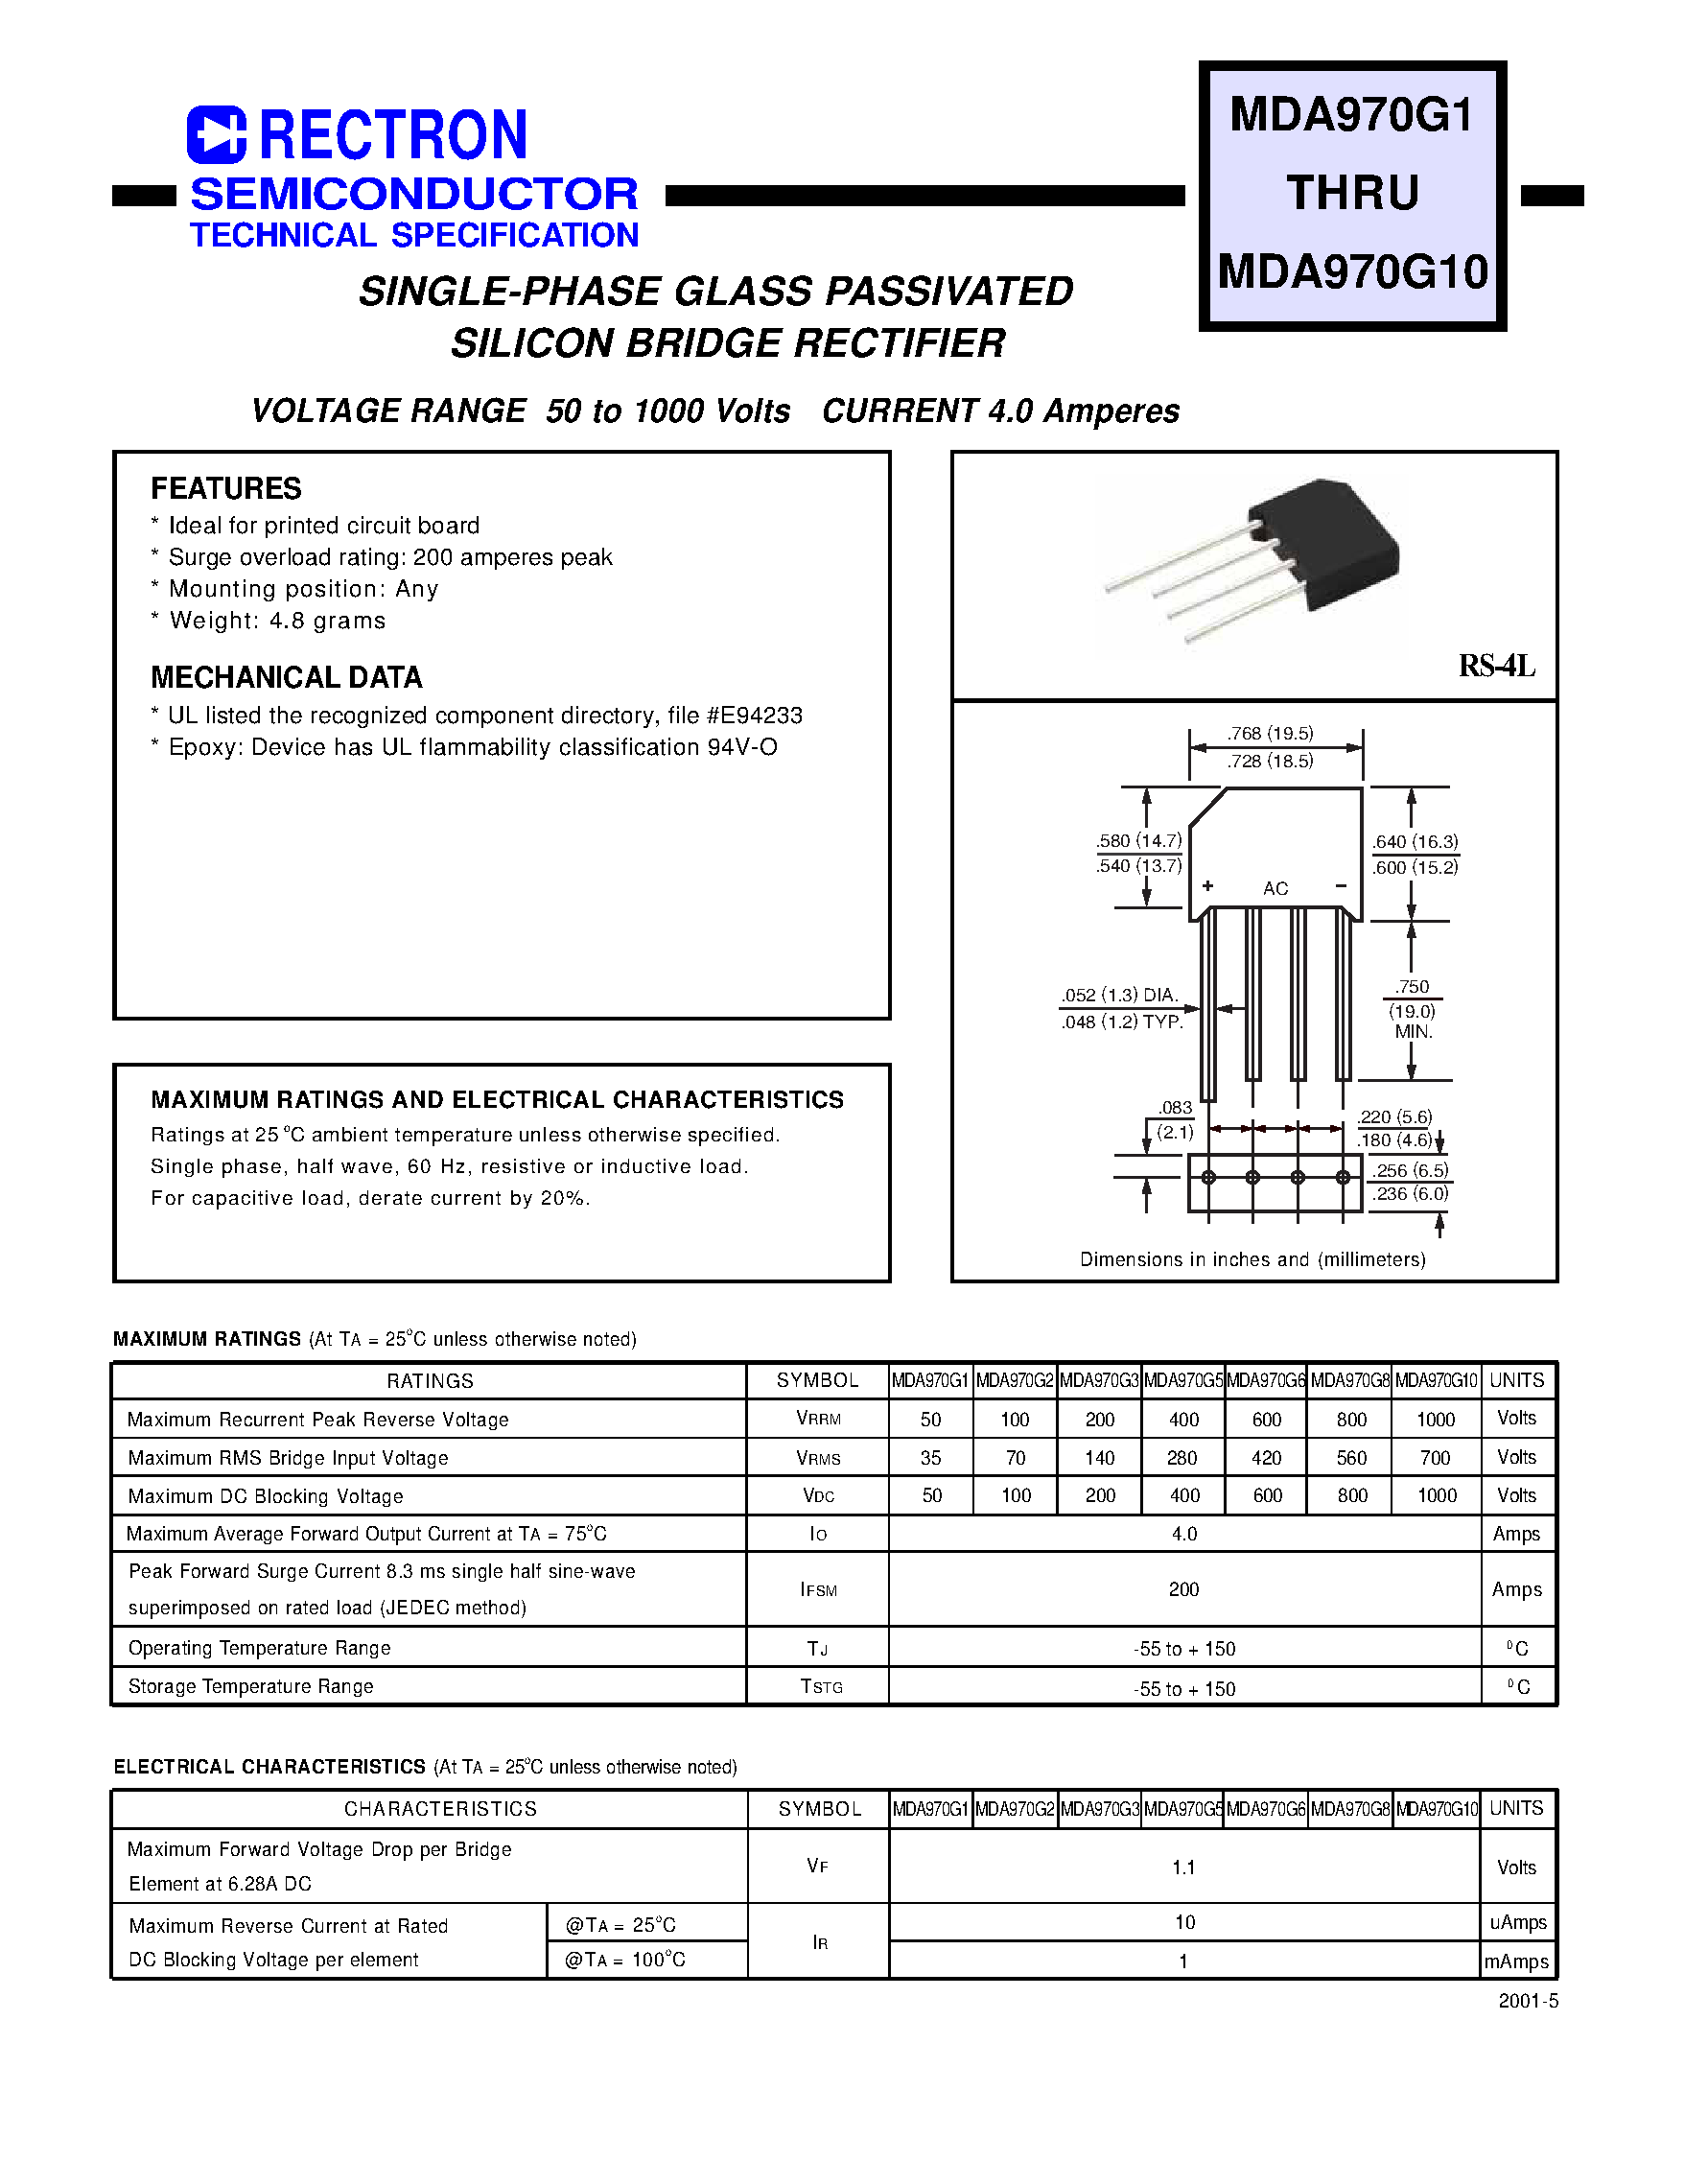 Datasheet MDA970G2 - SINGLE-PHASE GLASS PASSIVATED SILICON BRIDGE RECTIFIER (VOLTAGE RANGE 50 to 1000 Volts CURRENT 4.0 Amperes) page 1